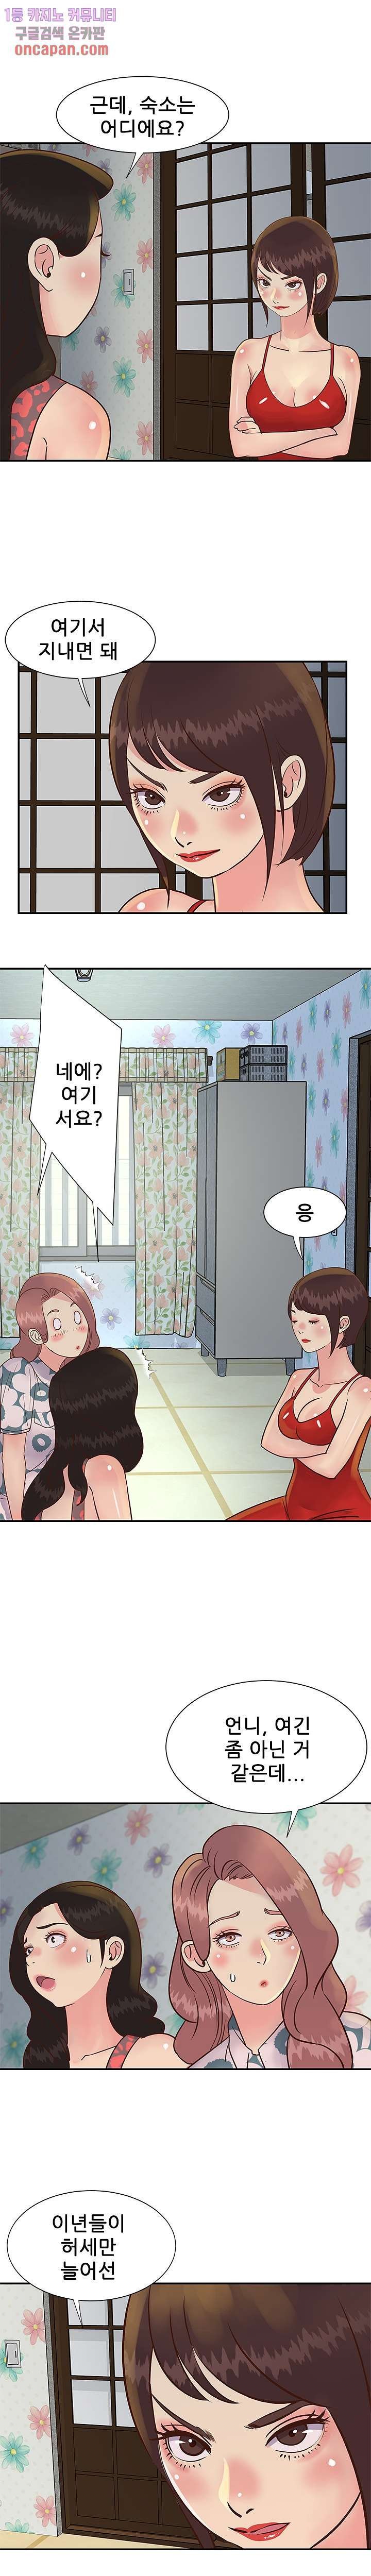 two-sisters-raw-chap-29-8